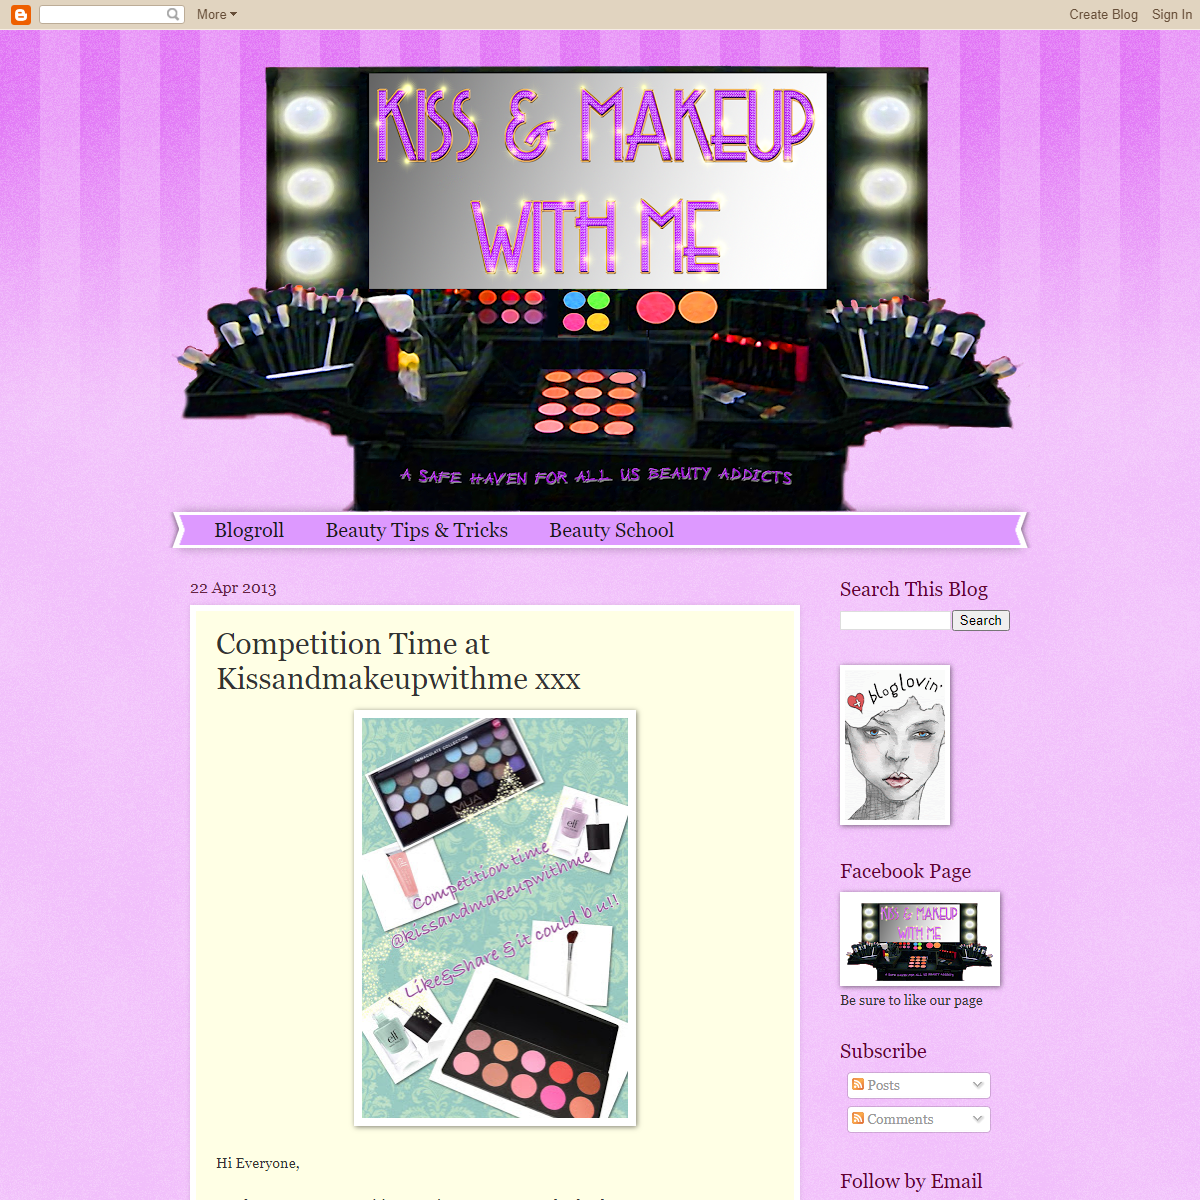 A complete backup of https://kissandmakeupwithme.blogspot.com/2013/04/competition-time-at-kissandmakeupwithme.html